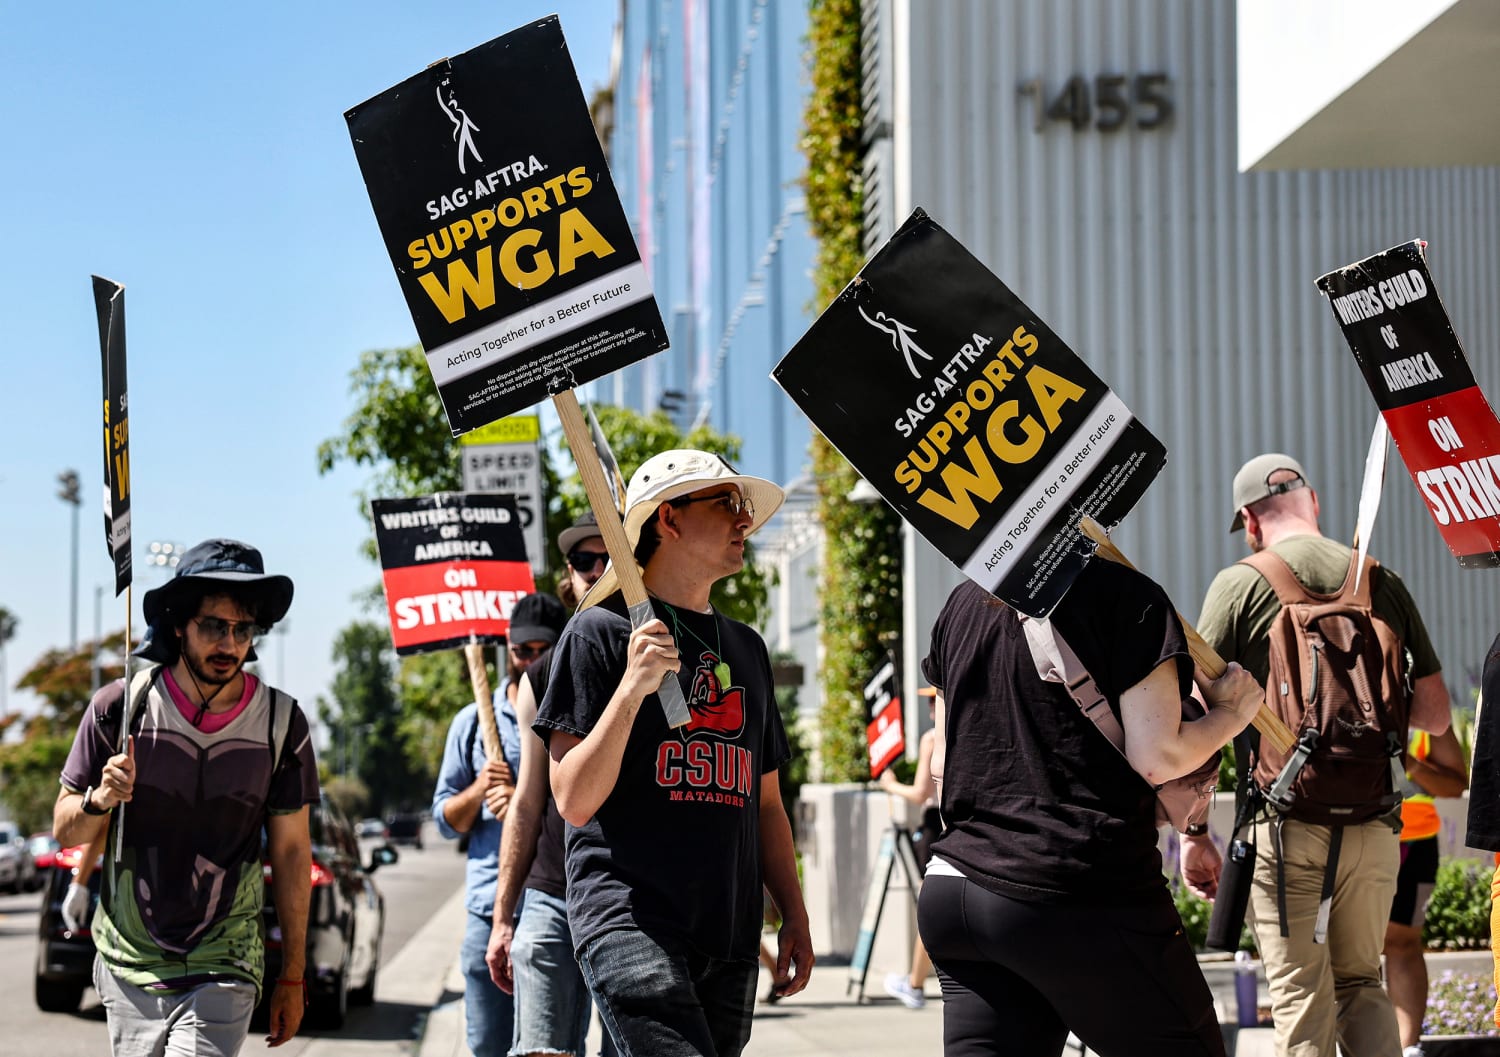 Strikes End: Hollywood Lessons from SAG and WGA Shutdowns